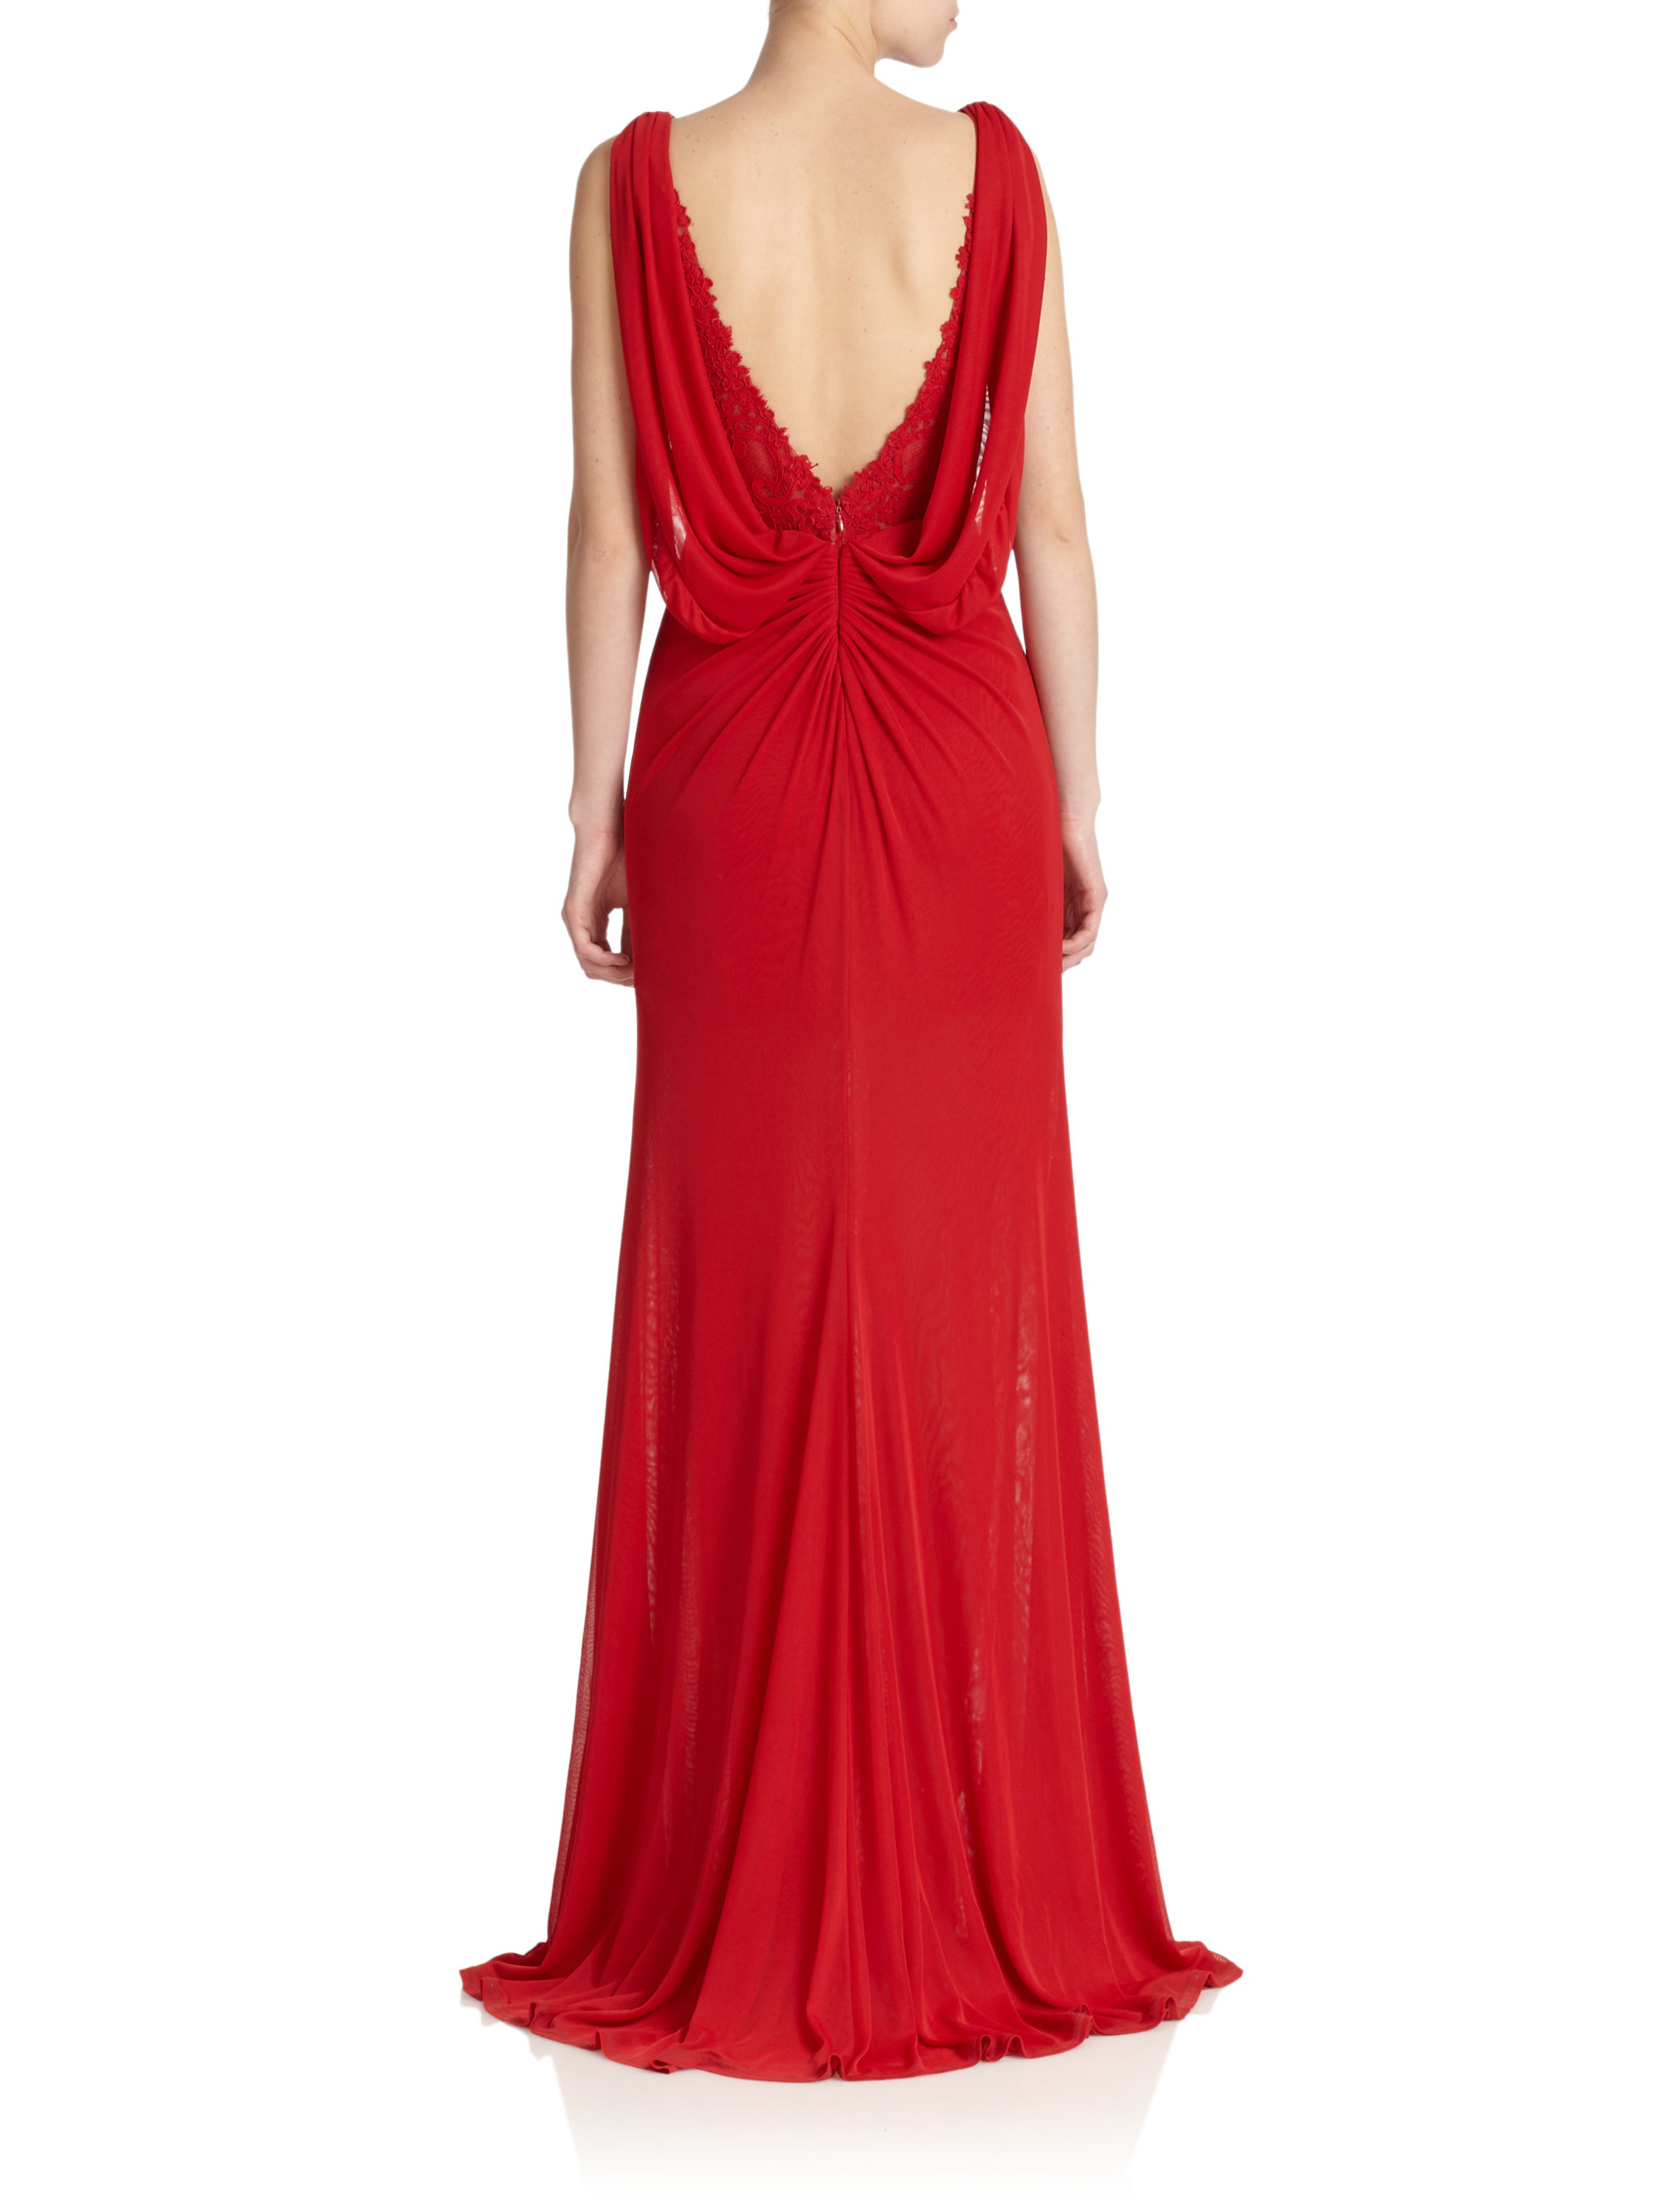 Lyst - Ml Monique Lhuillier Draped Cowl-back Gown in Red